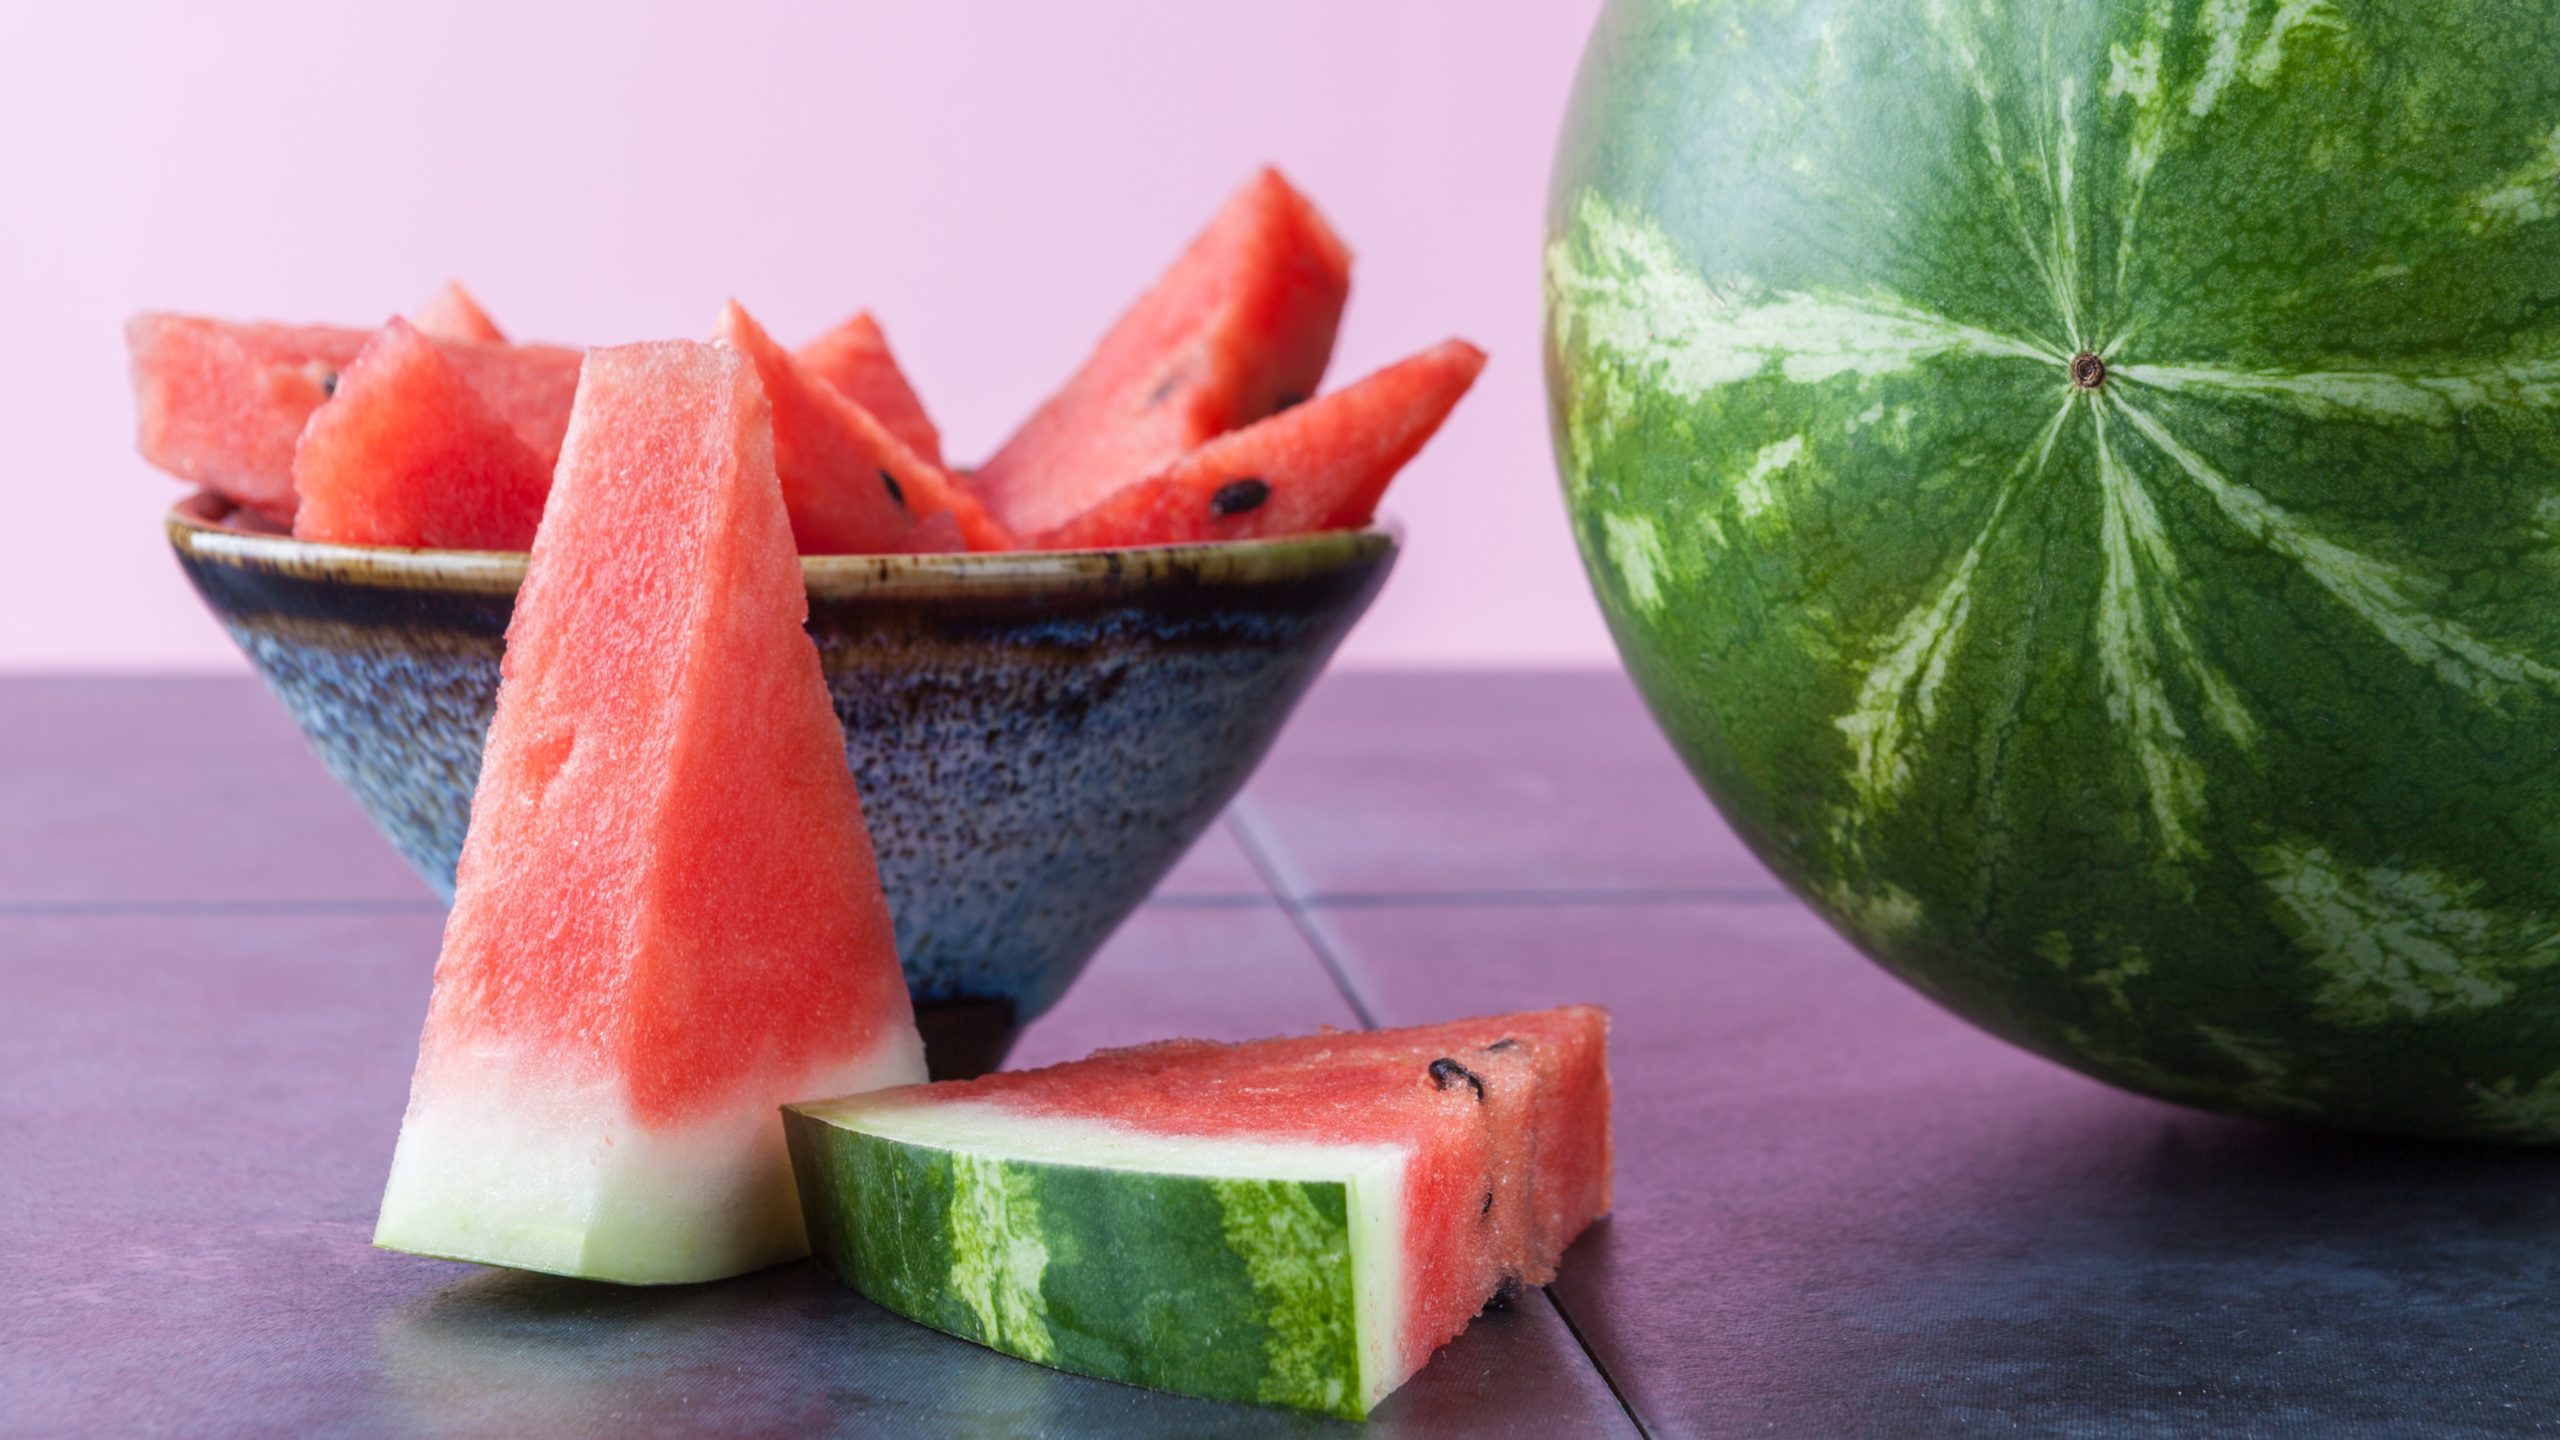 Watermelon Has Many Benefits, Are You Aware?